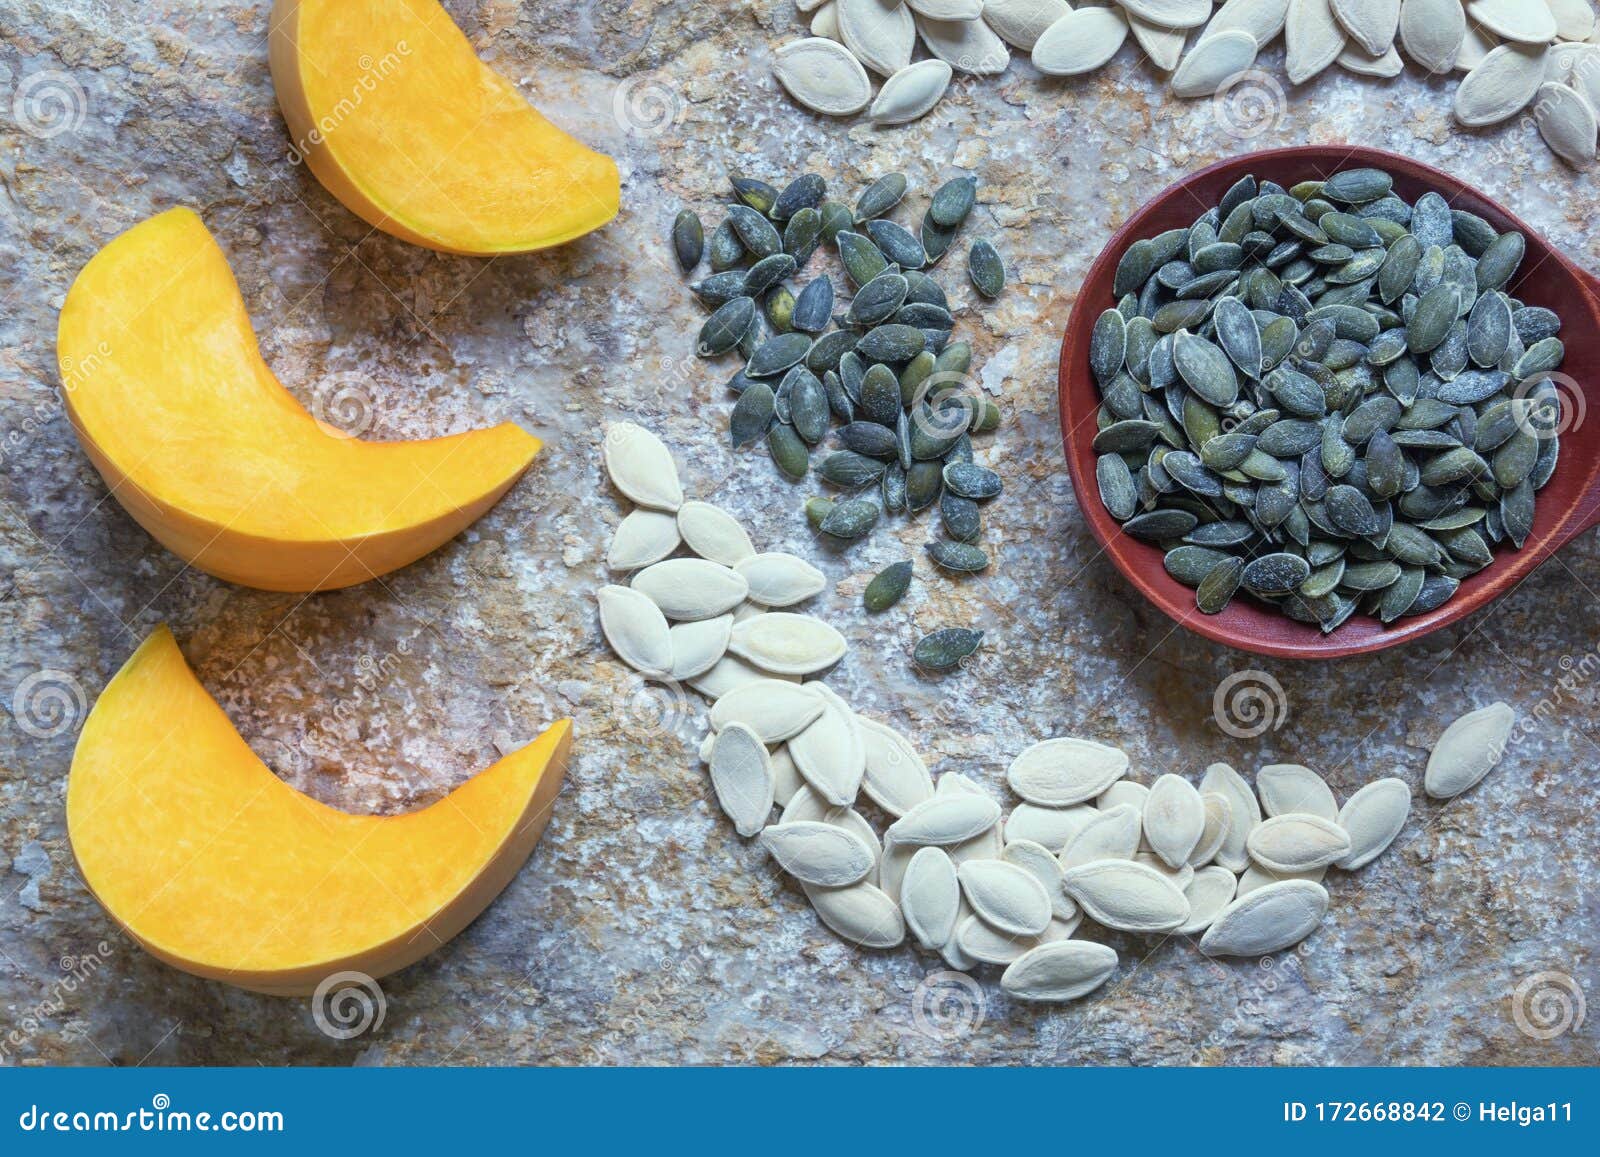 Download Yellow Pumpkin Slices And Seeds In Shell And Peeled Large Wooden Spoon With Peeled Pumpkin Seeds Stock Photo Image Of Vegan Food 172668842 Yellowimages Mockups